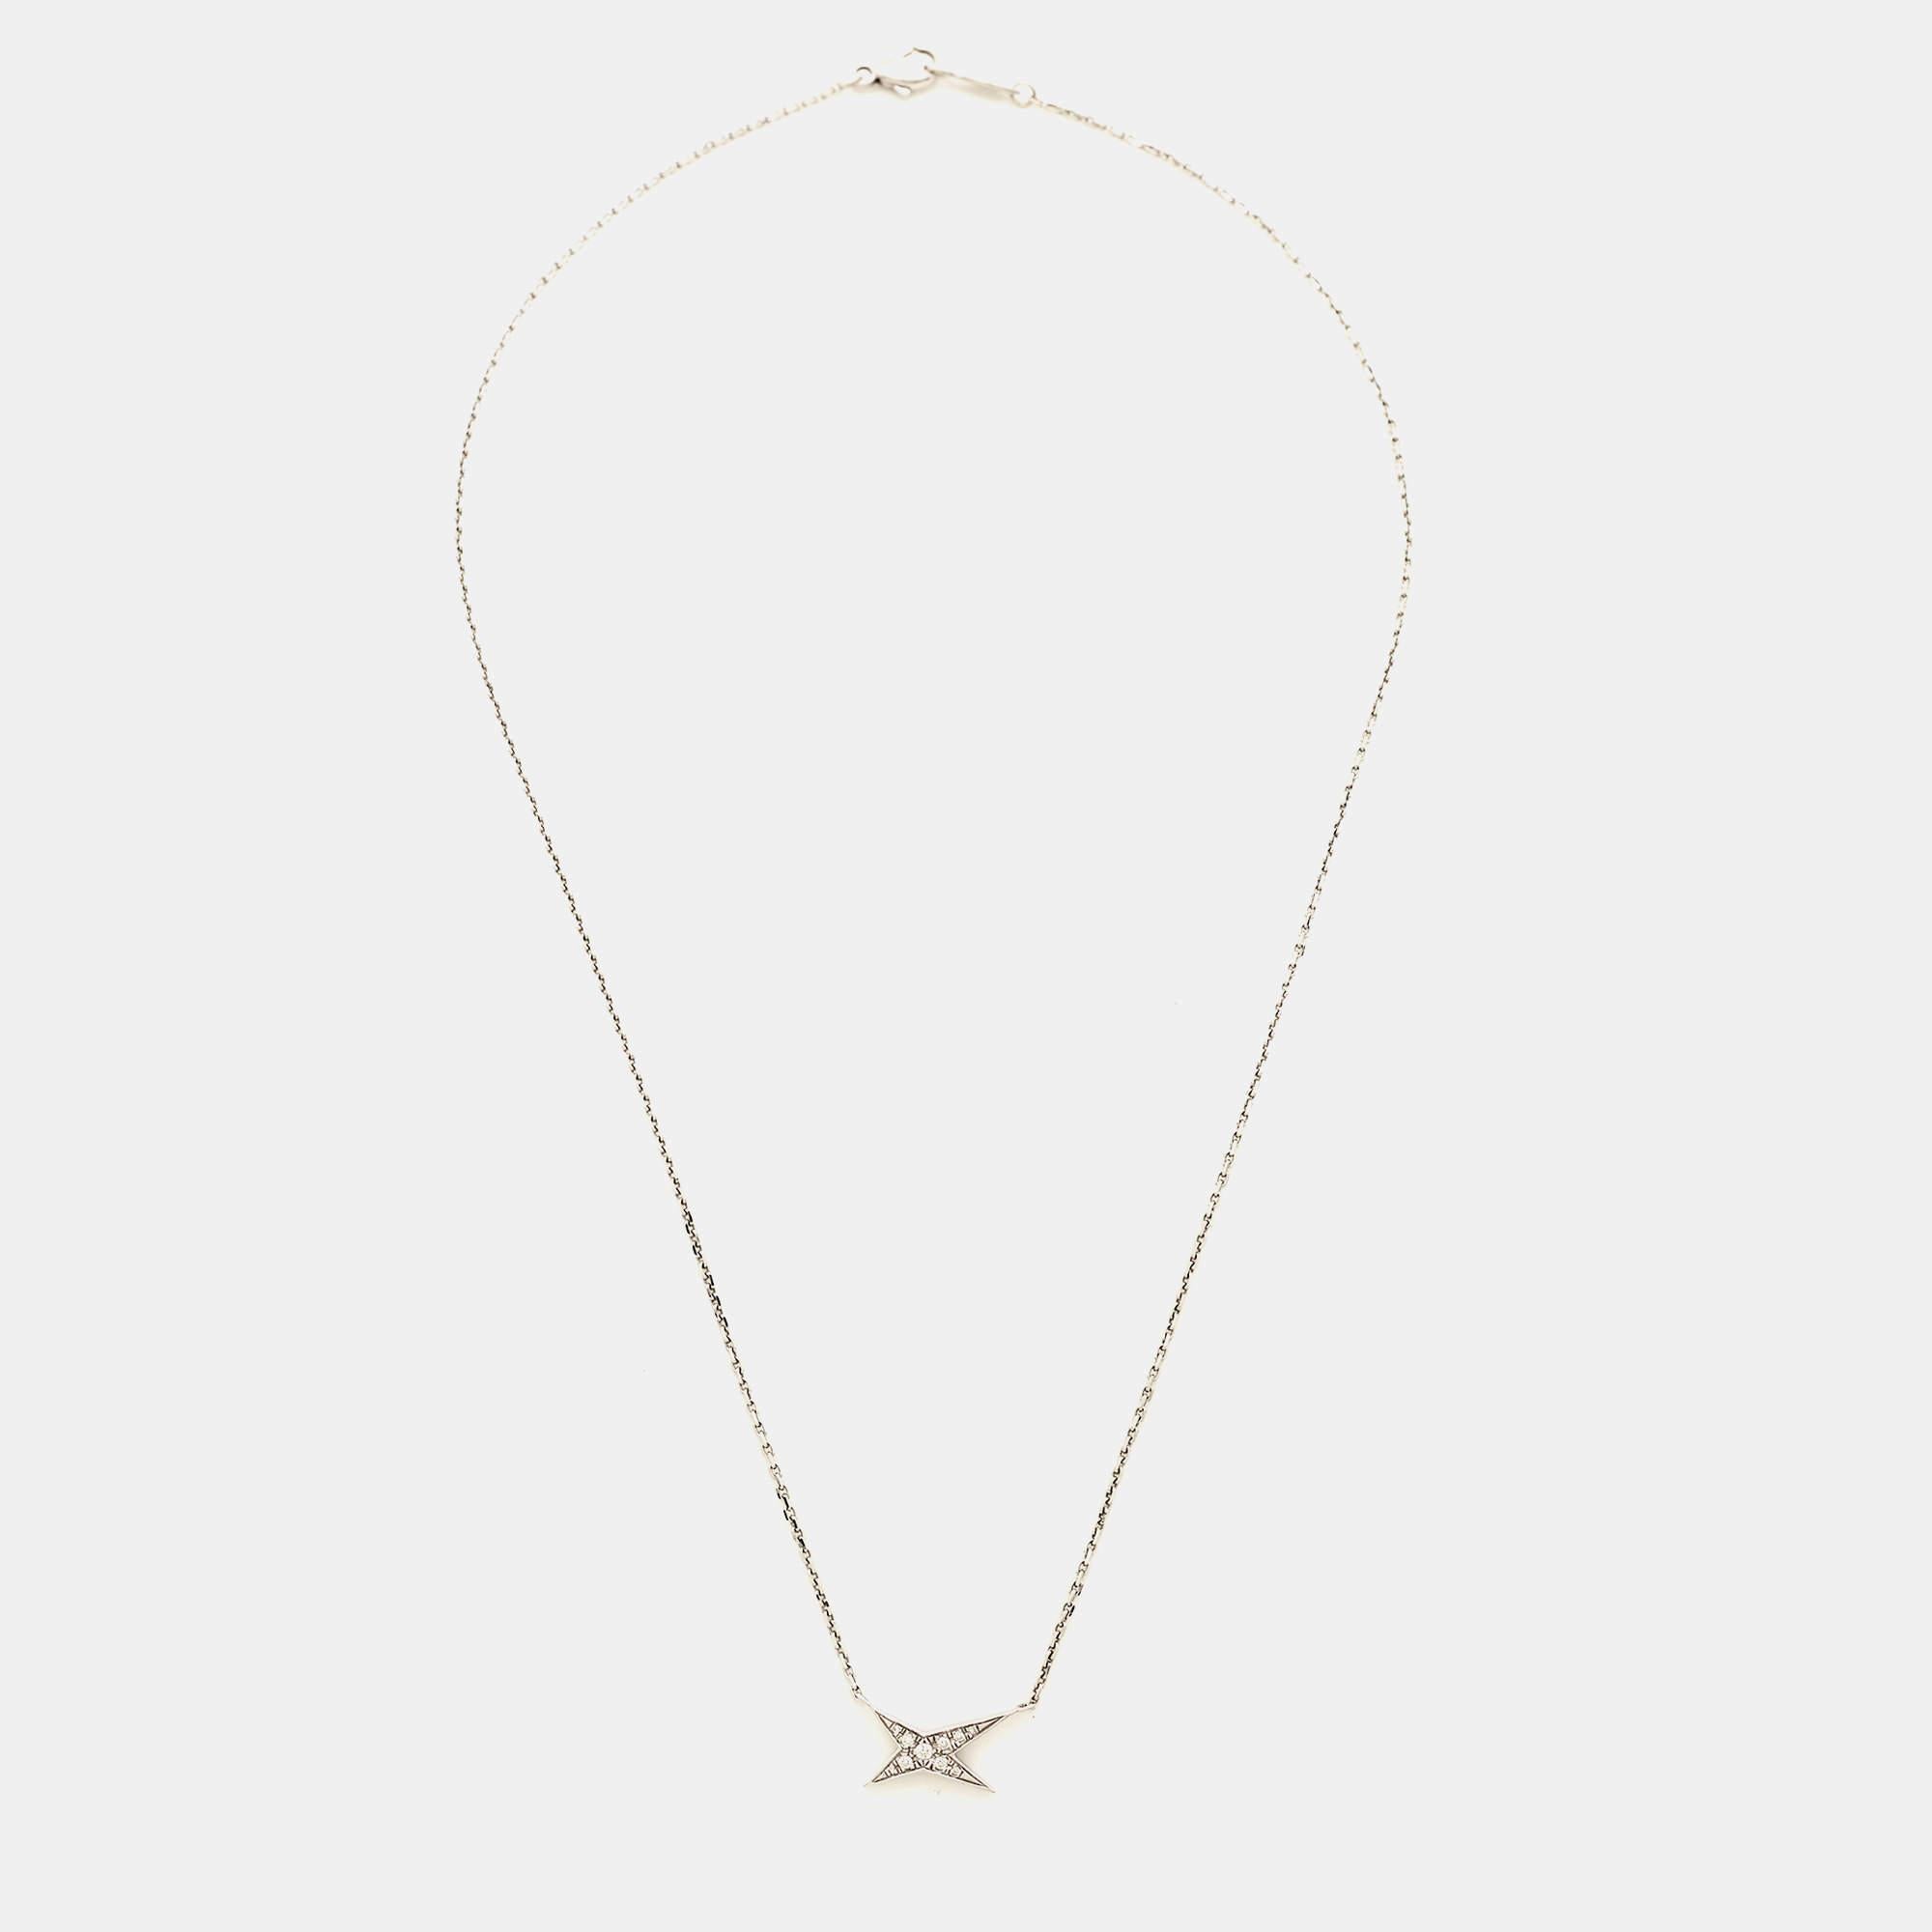 Founded in Paris in 1827, Mauboussin is a brand people turn to for elegant, timeless jewelry, watches, and accessories. This Valentin For You Star necklace is made of 18k white gold, and it has a 4-point star pendant set with diamonds.

